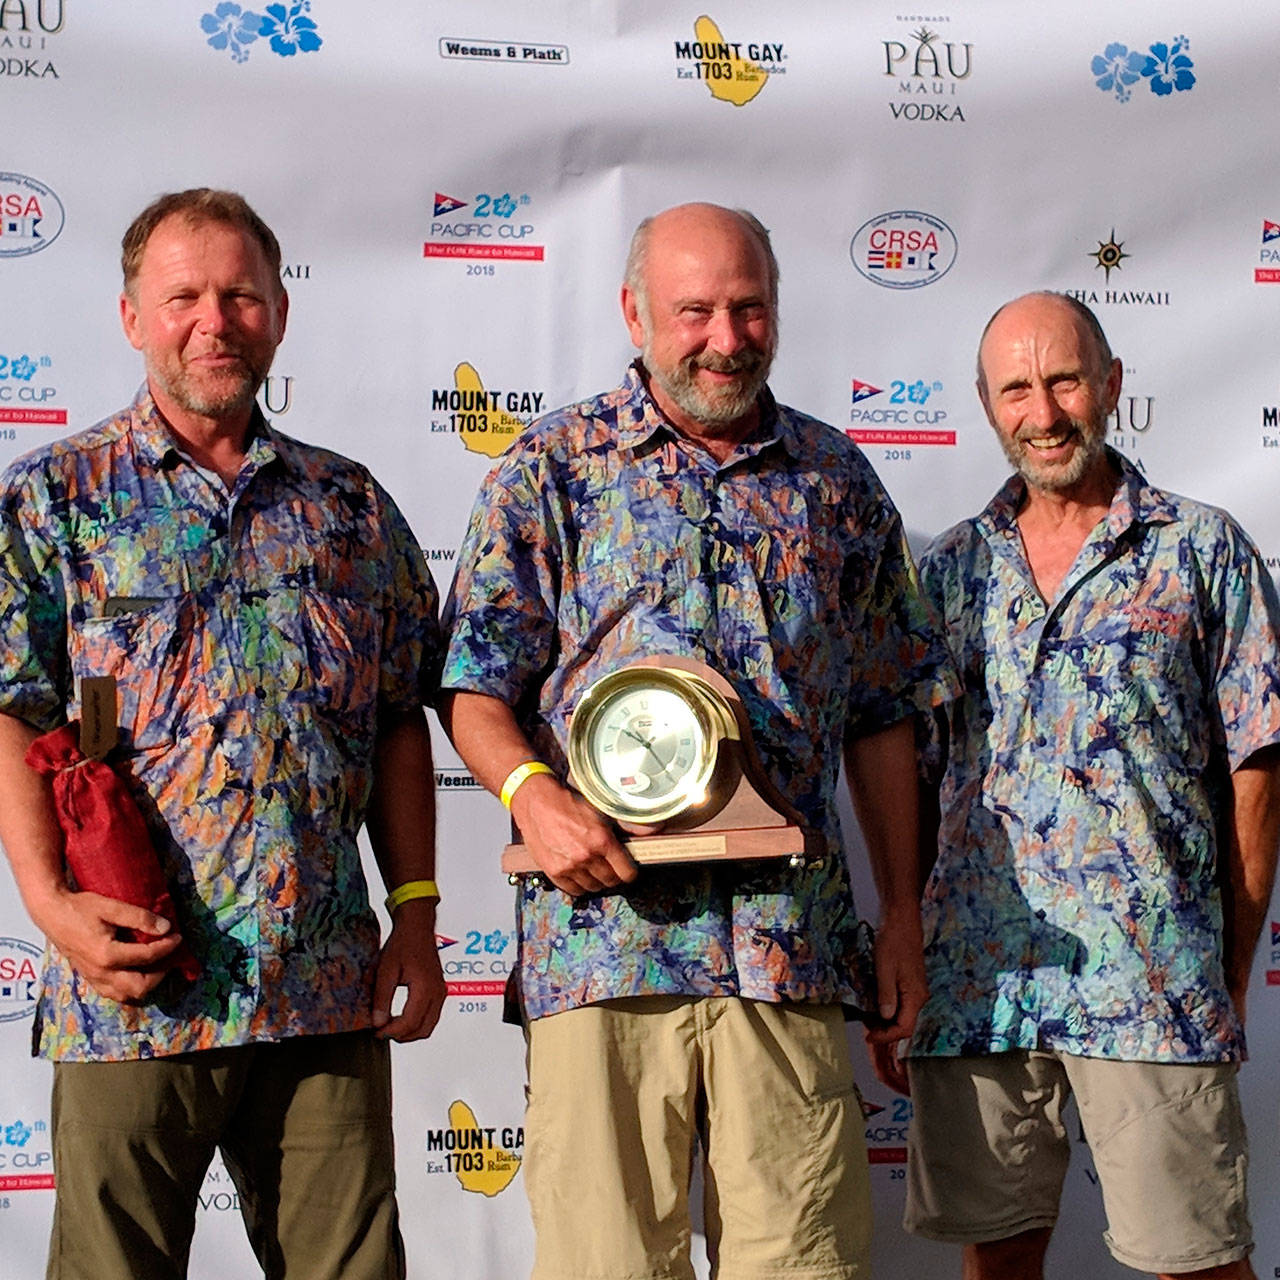 Stewart Putnam, Skipper Karl Haflinger and David Smullin on the podium for the first place award in the Weems & Plath division of the Pac Cup. (Courtesy Photo)